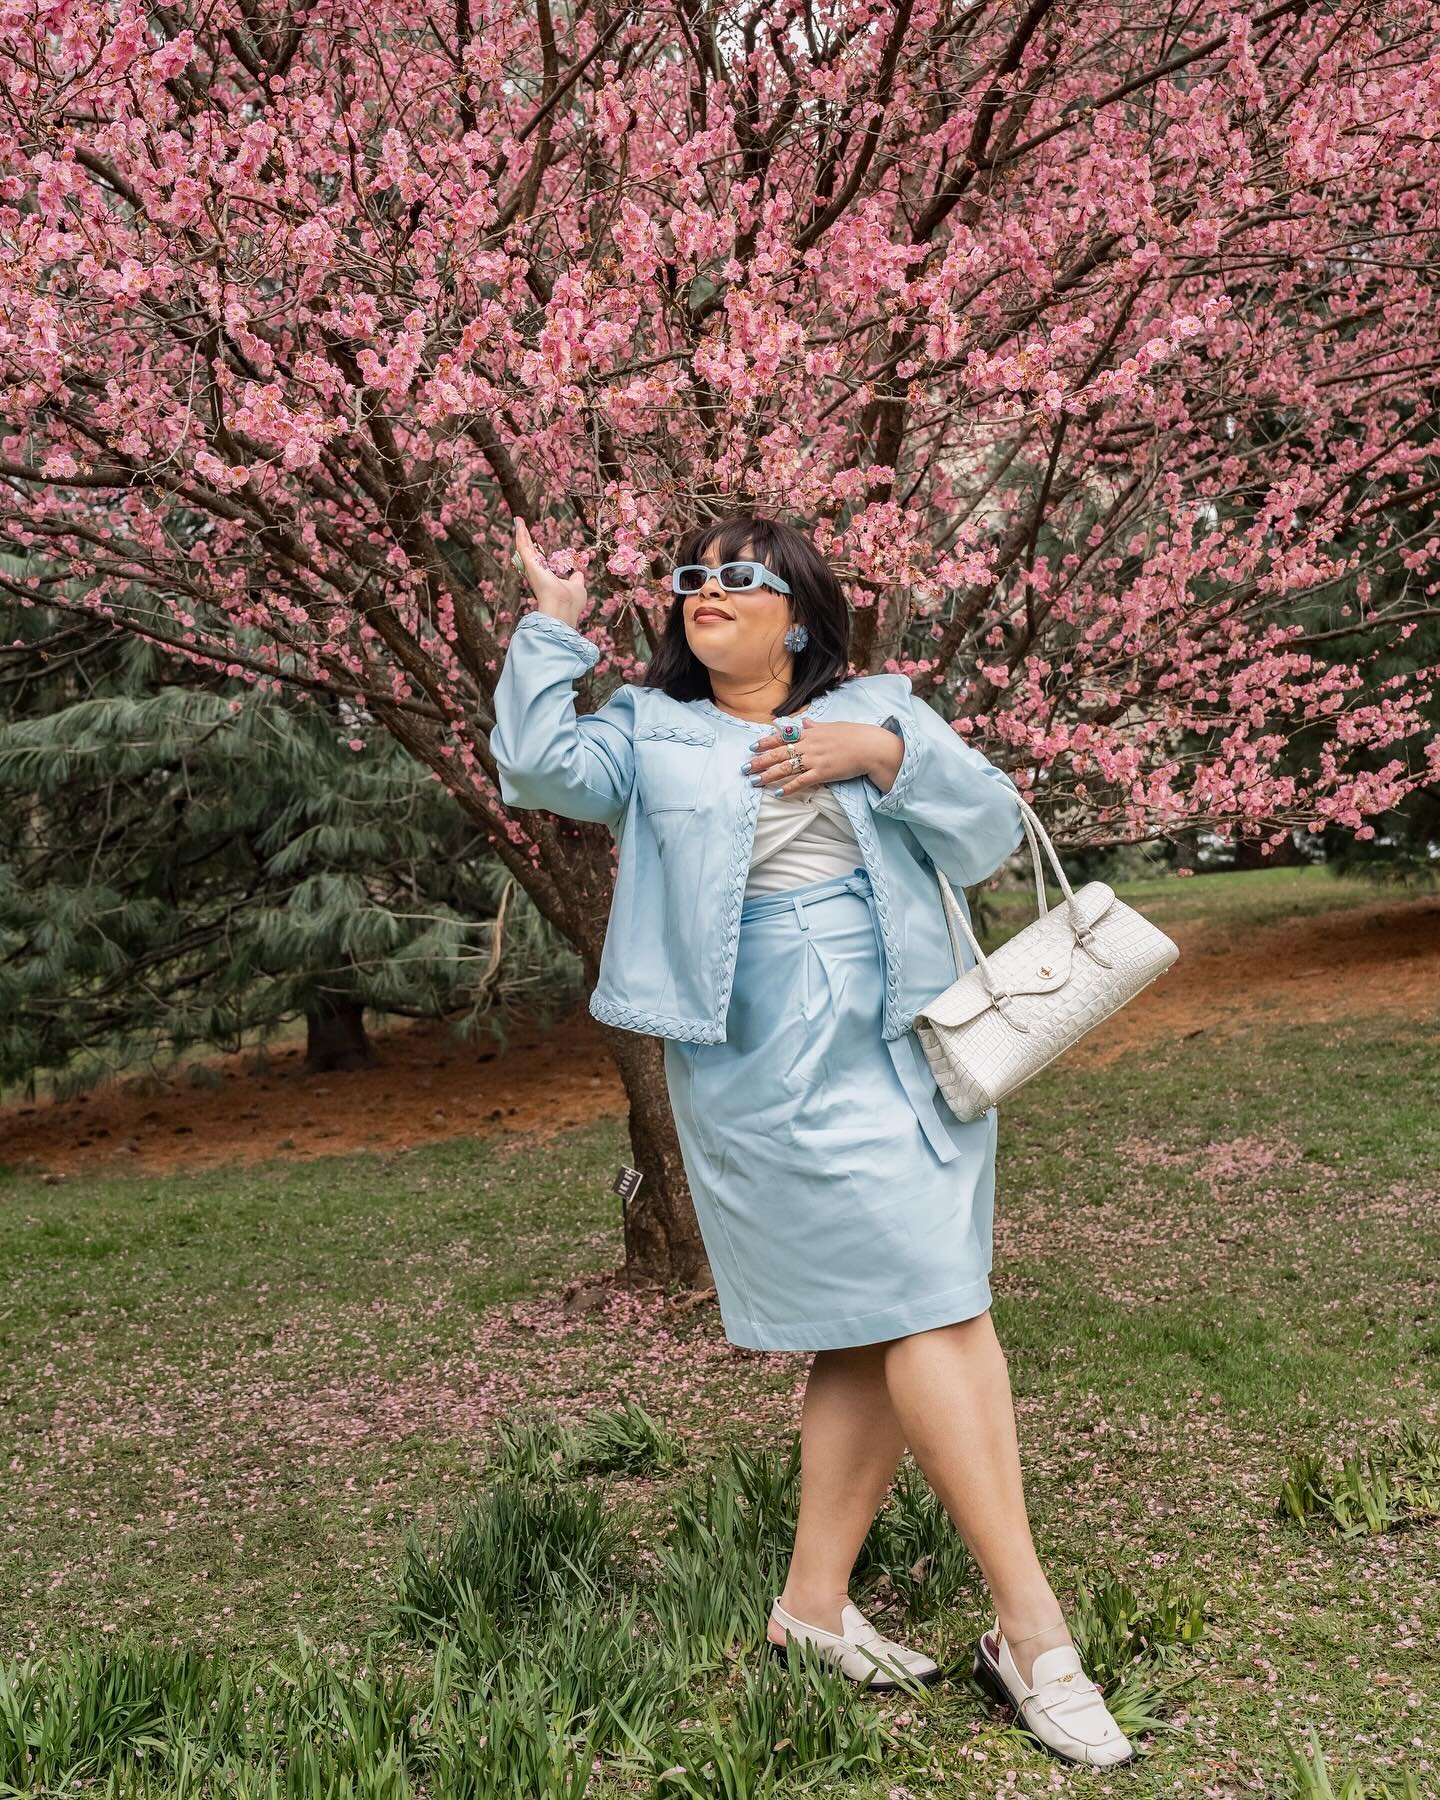 What sets the Extraordinary apart from the Ordinary is having the character of strength, belief, faith, tenacity, discipline, perseverance to pursue what is in alignment with one's core values and soul essence.

#springfashion #springstyle #springflo